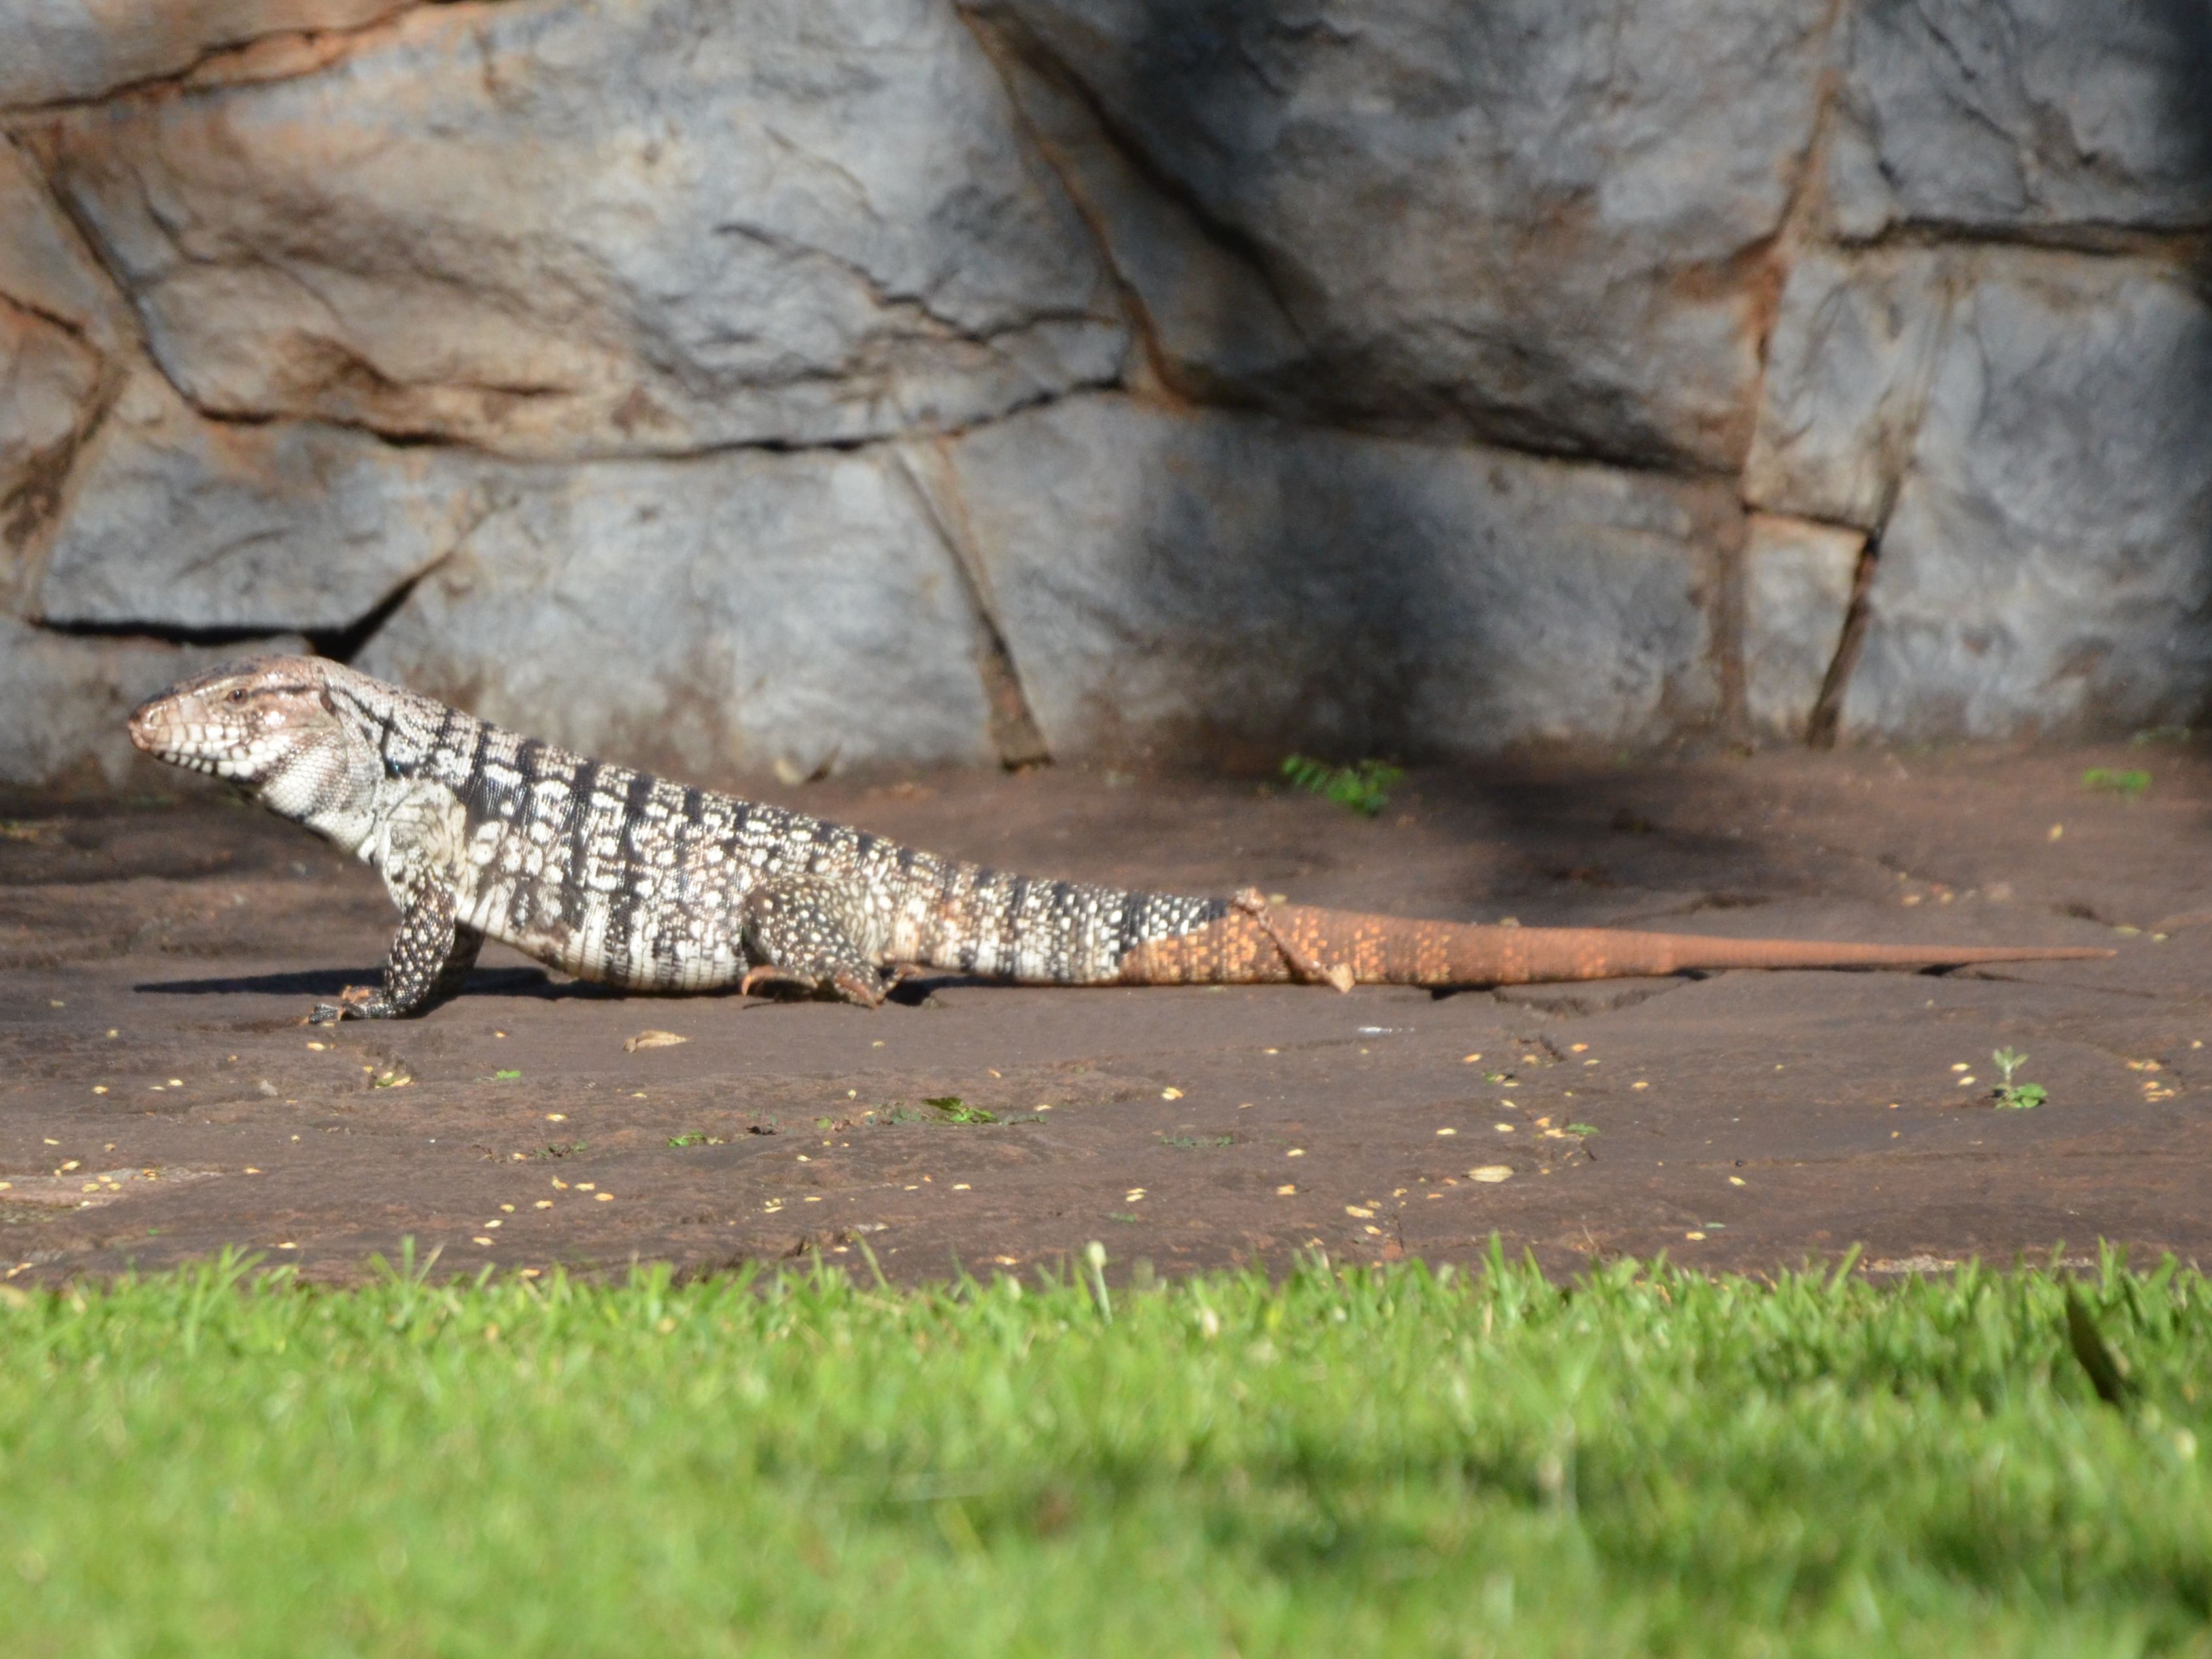 Click picture to see more Tegu Lizards.